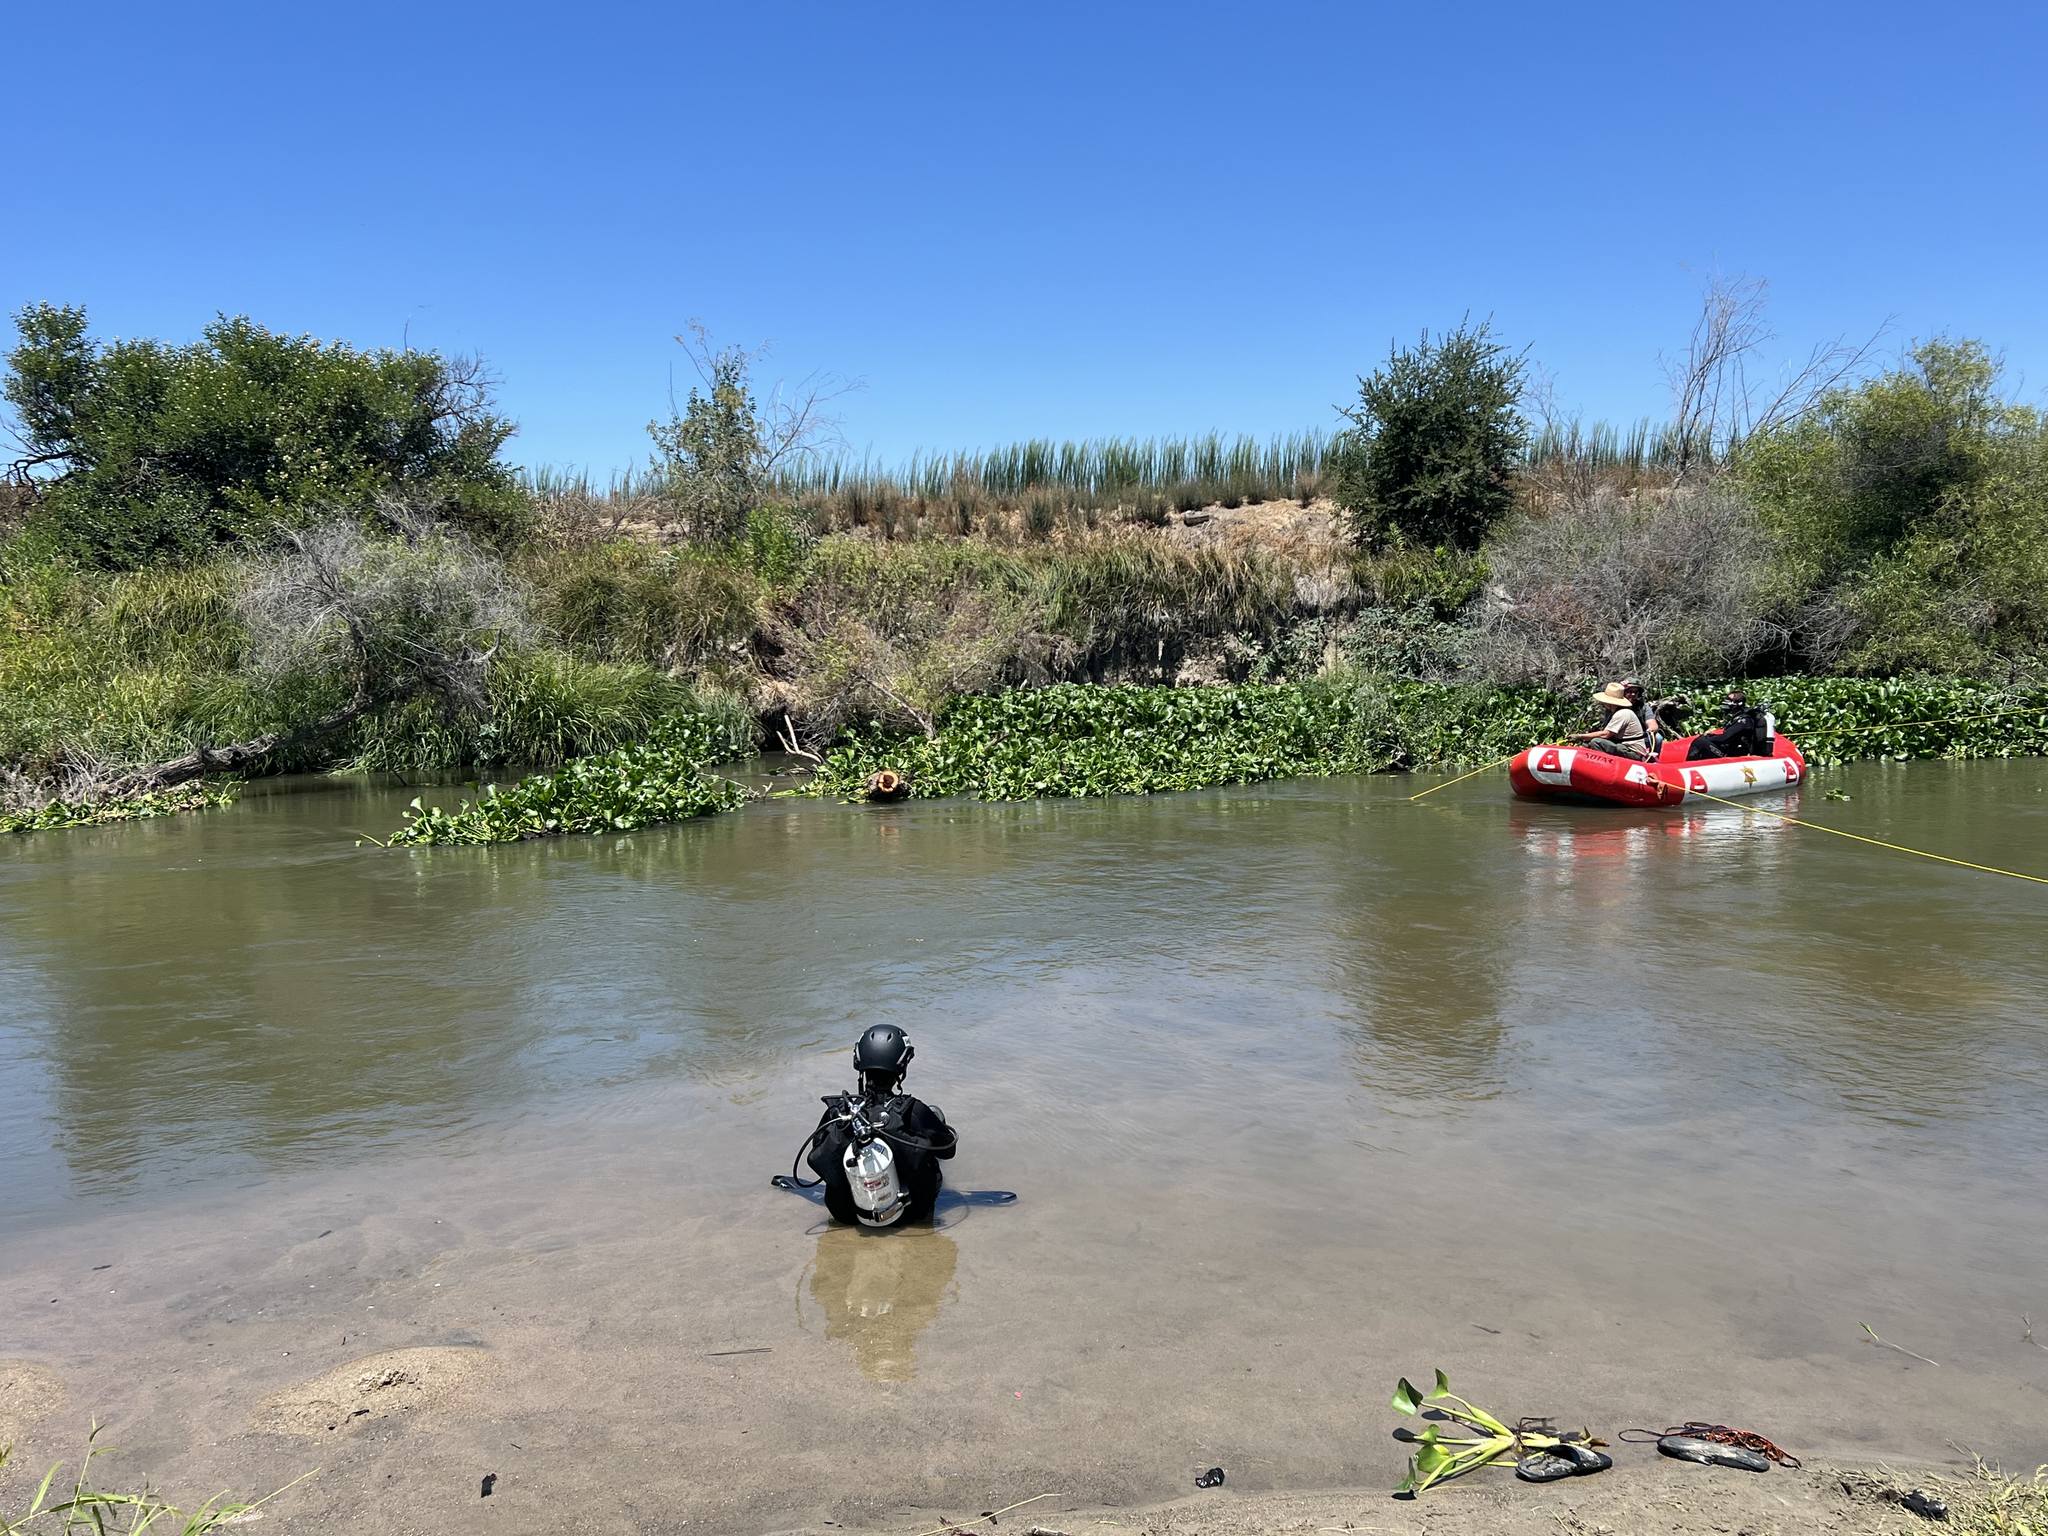 San Jose teen confirmed to have drowned in San Joaquin River, sheriff says